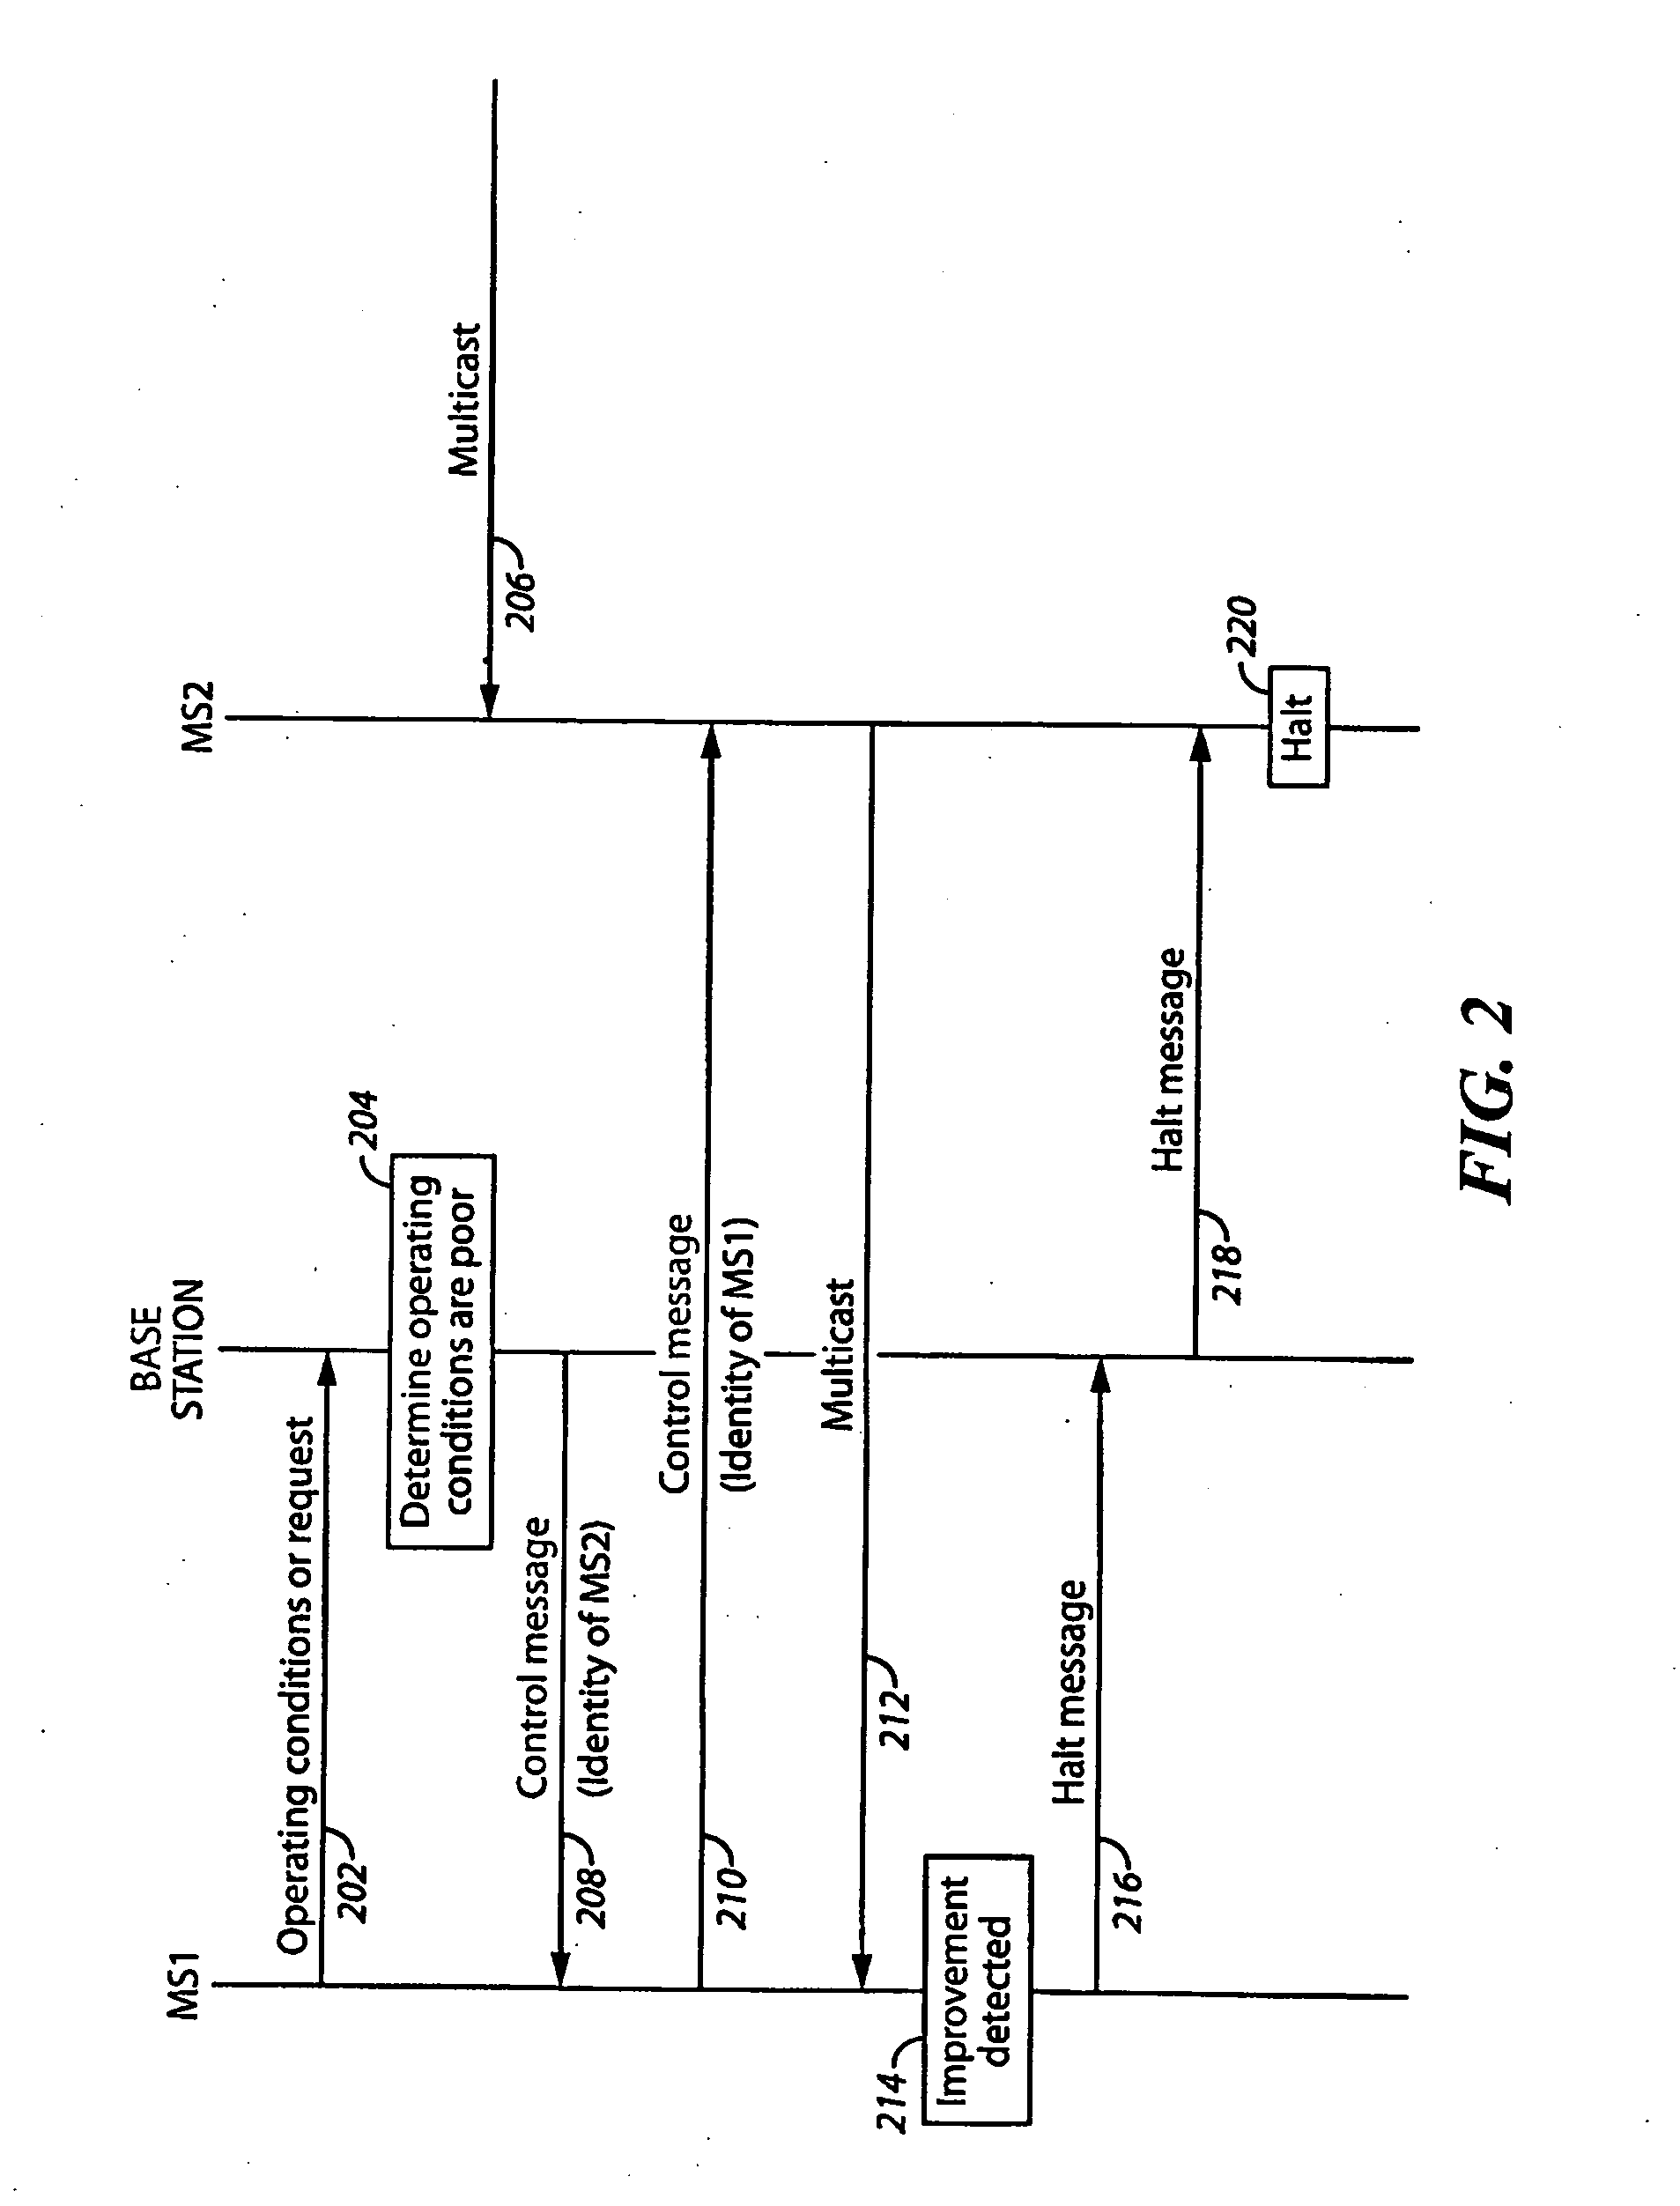 System and method for multicasting through short range mobile-to-mobile communication